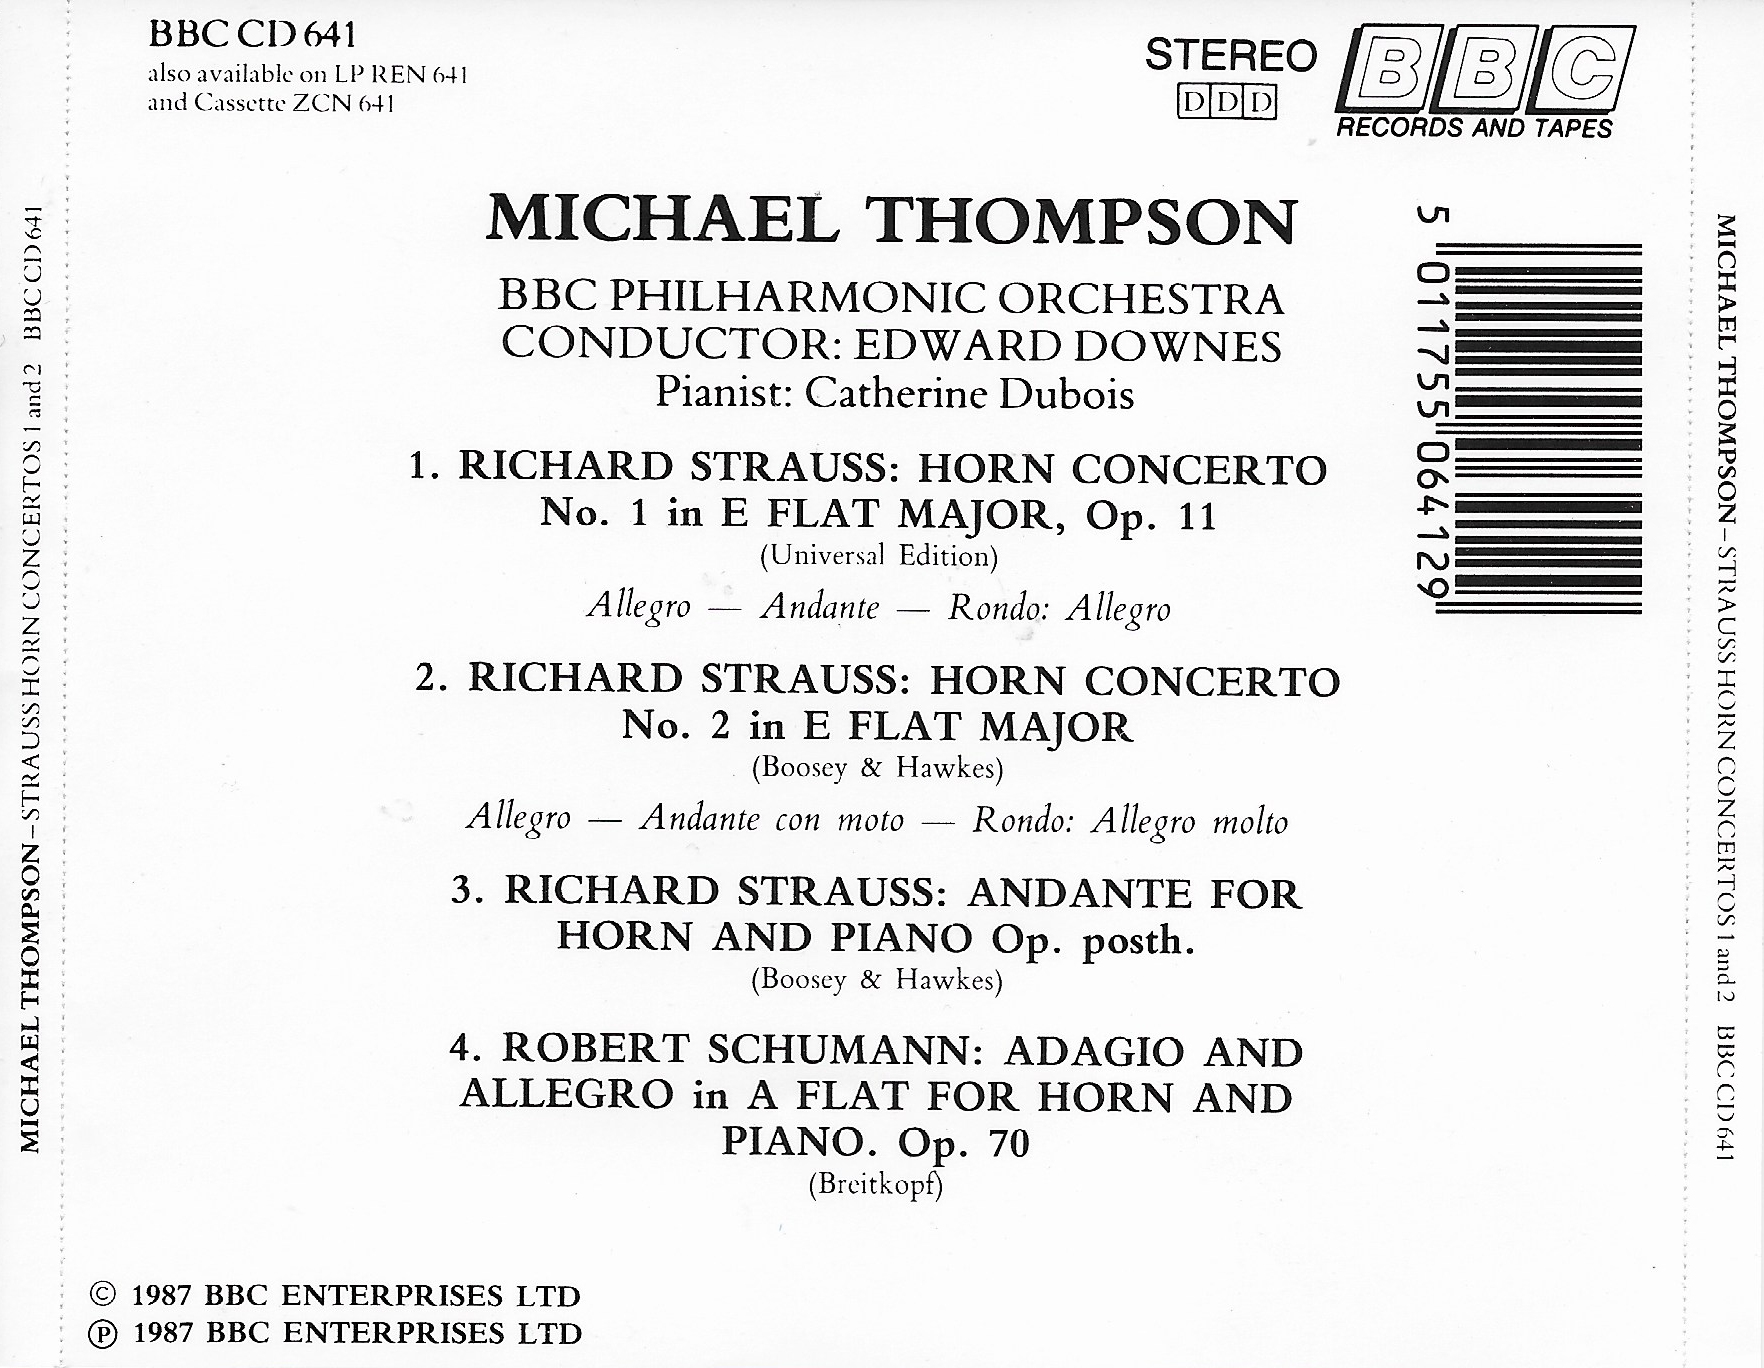 Picture of BBCCD641 Horn concertos by artist Richard Strauss / Michael Thompson and the BBC Philharmonic Orchrestra from the BBC records and Tapes library